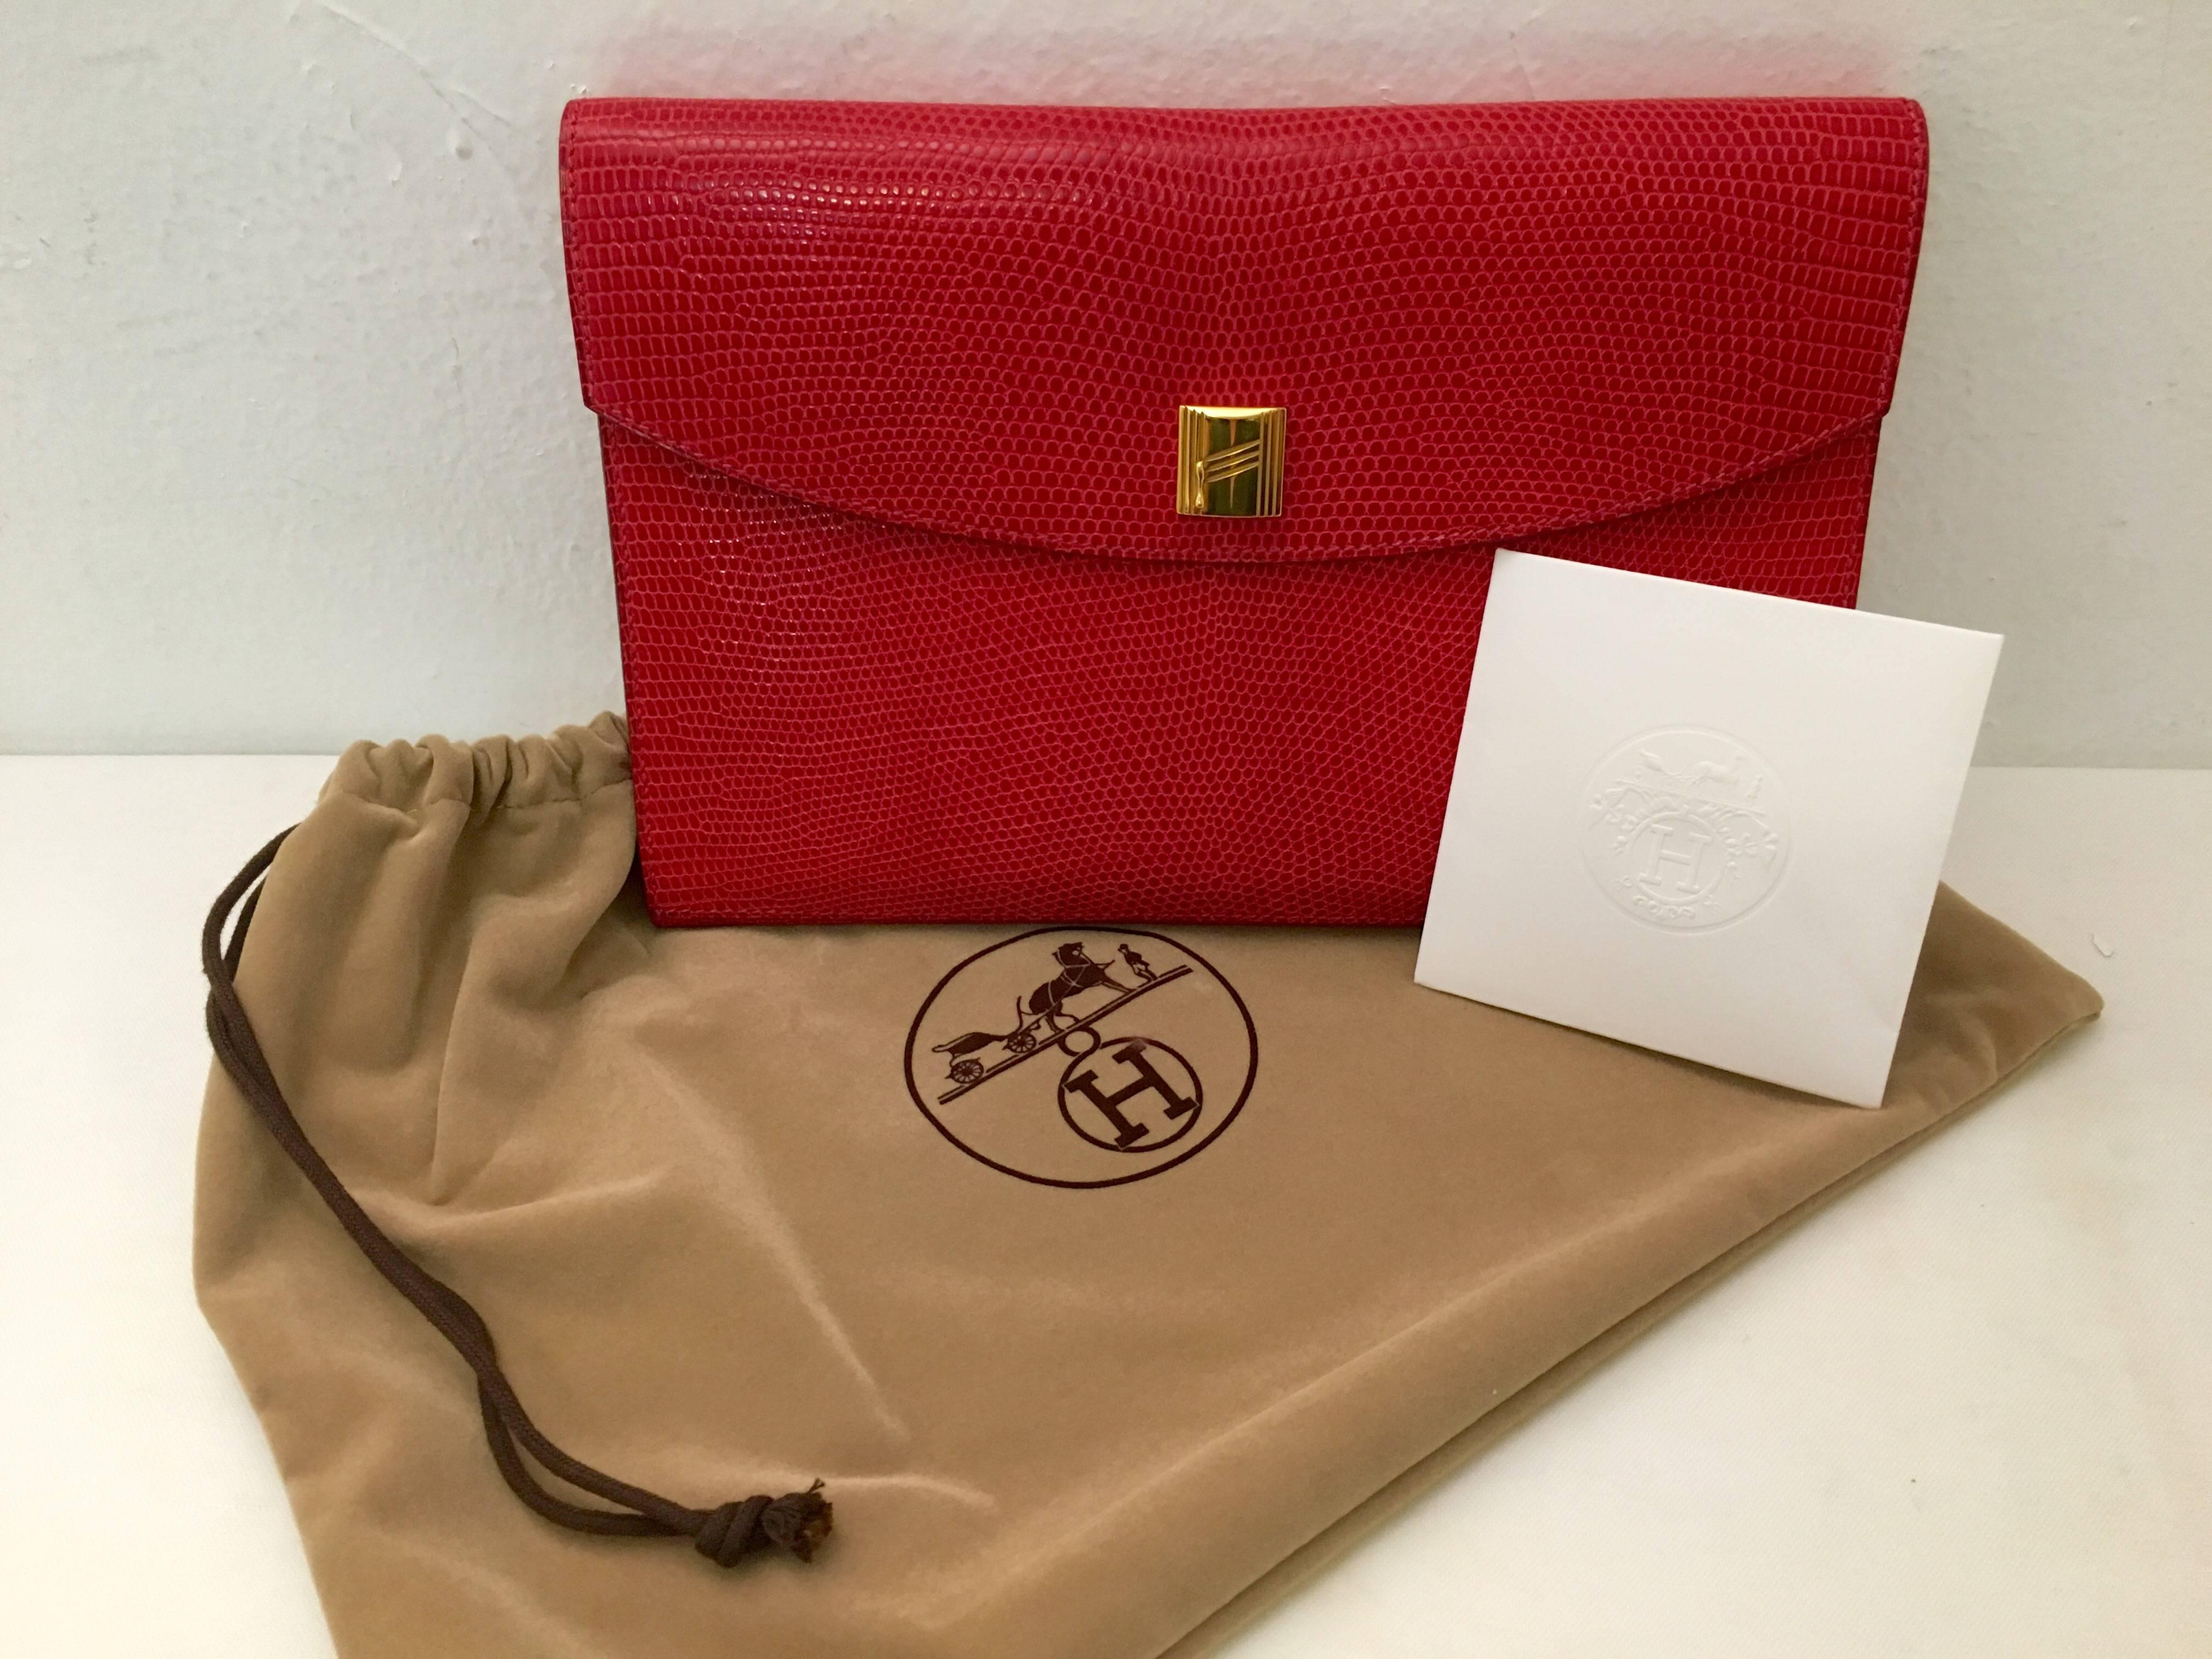 Hermes handbags are wildly collectable and hold their value like none other!
This pristine red lizard clutch is elegance in simplicity.  A distinctive gold tone stylized "H" covers the snap down closure. Red leather inside.  Unmarred,